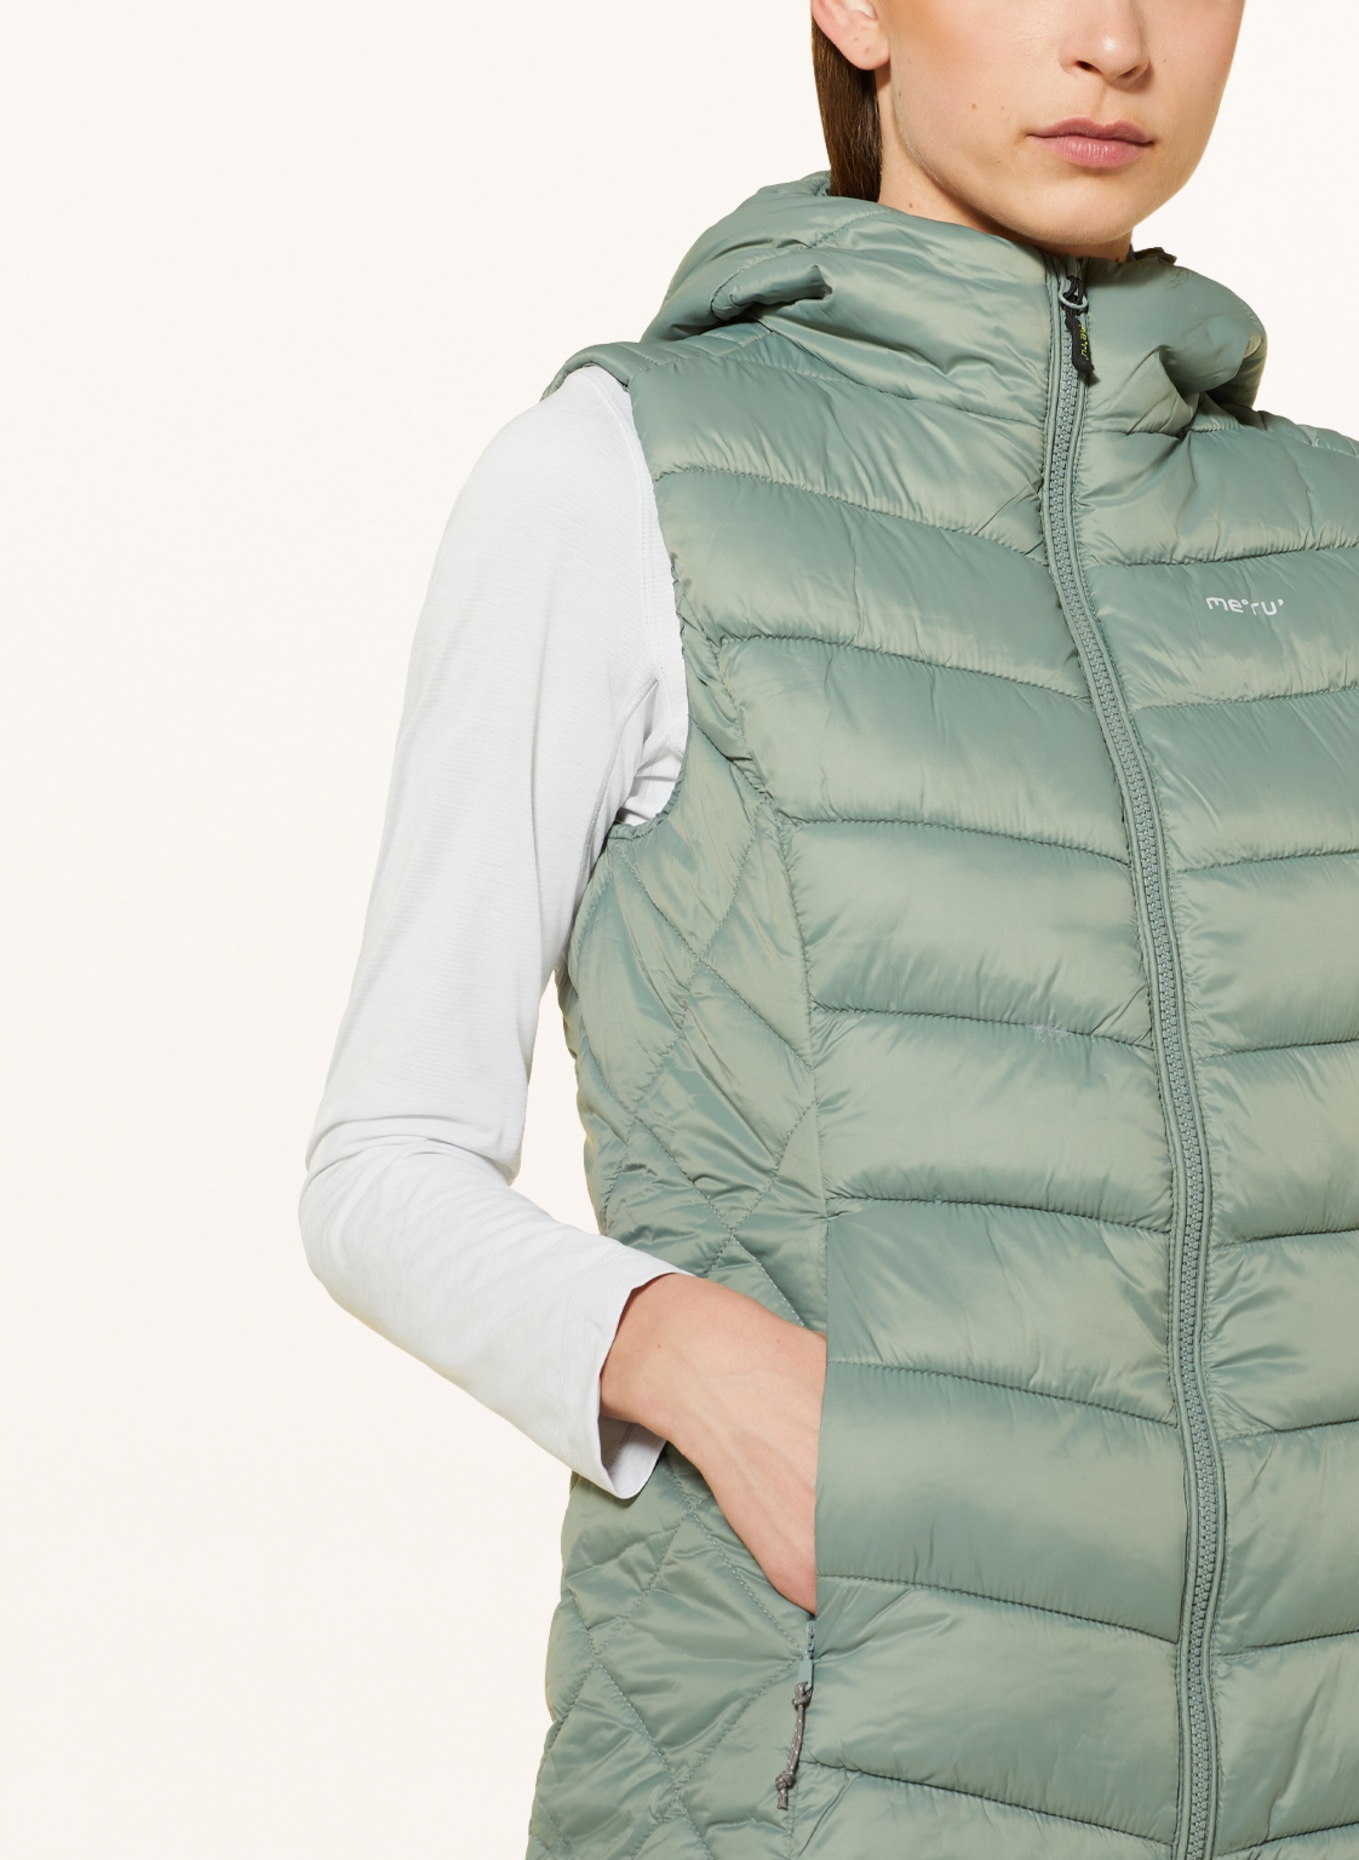 me°ru' Quilted vest RUSSELL, Color: LIGHT GREEN (Image 5)